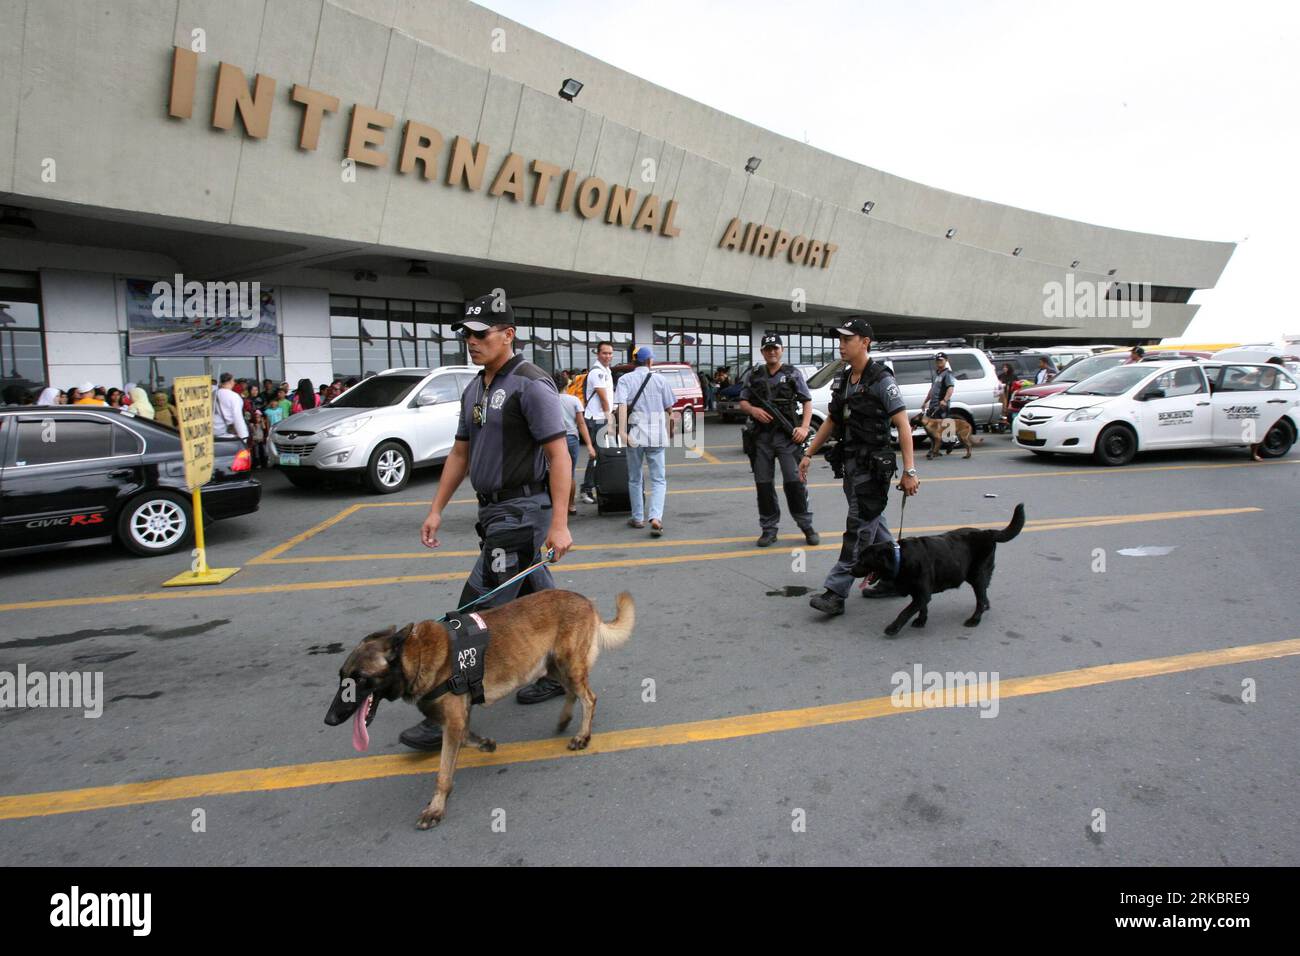 Bildnummer: 54600788  Datum: 03.11.2010  Copyright: imago/Xinhua MANILA, Nov. 3, 2010 (Xinhua) -- Members of the K-9 Unit of the airport police guard around to check the security of passengers at the Ninoy Aquino International Airport in Pasay City, Philippines, Nov. 3, 2010. The Philippine National Police and the Armed Forces of the Philippines are on heightened alert after Australia and the United Kingdom released a travel advisory on the Philippines due to an imminent terrorist attack on areas frequented by foreigners and tourists in the country. (Xinhua/Rouelle Umali) (yc) PHILIPPINES-AIRP Stock Photo